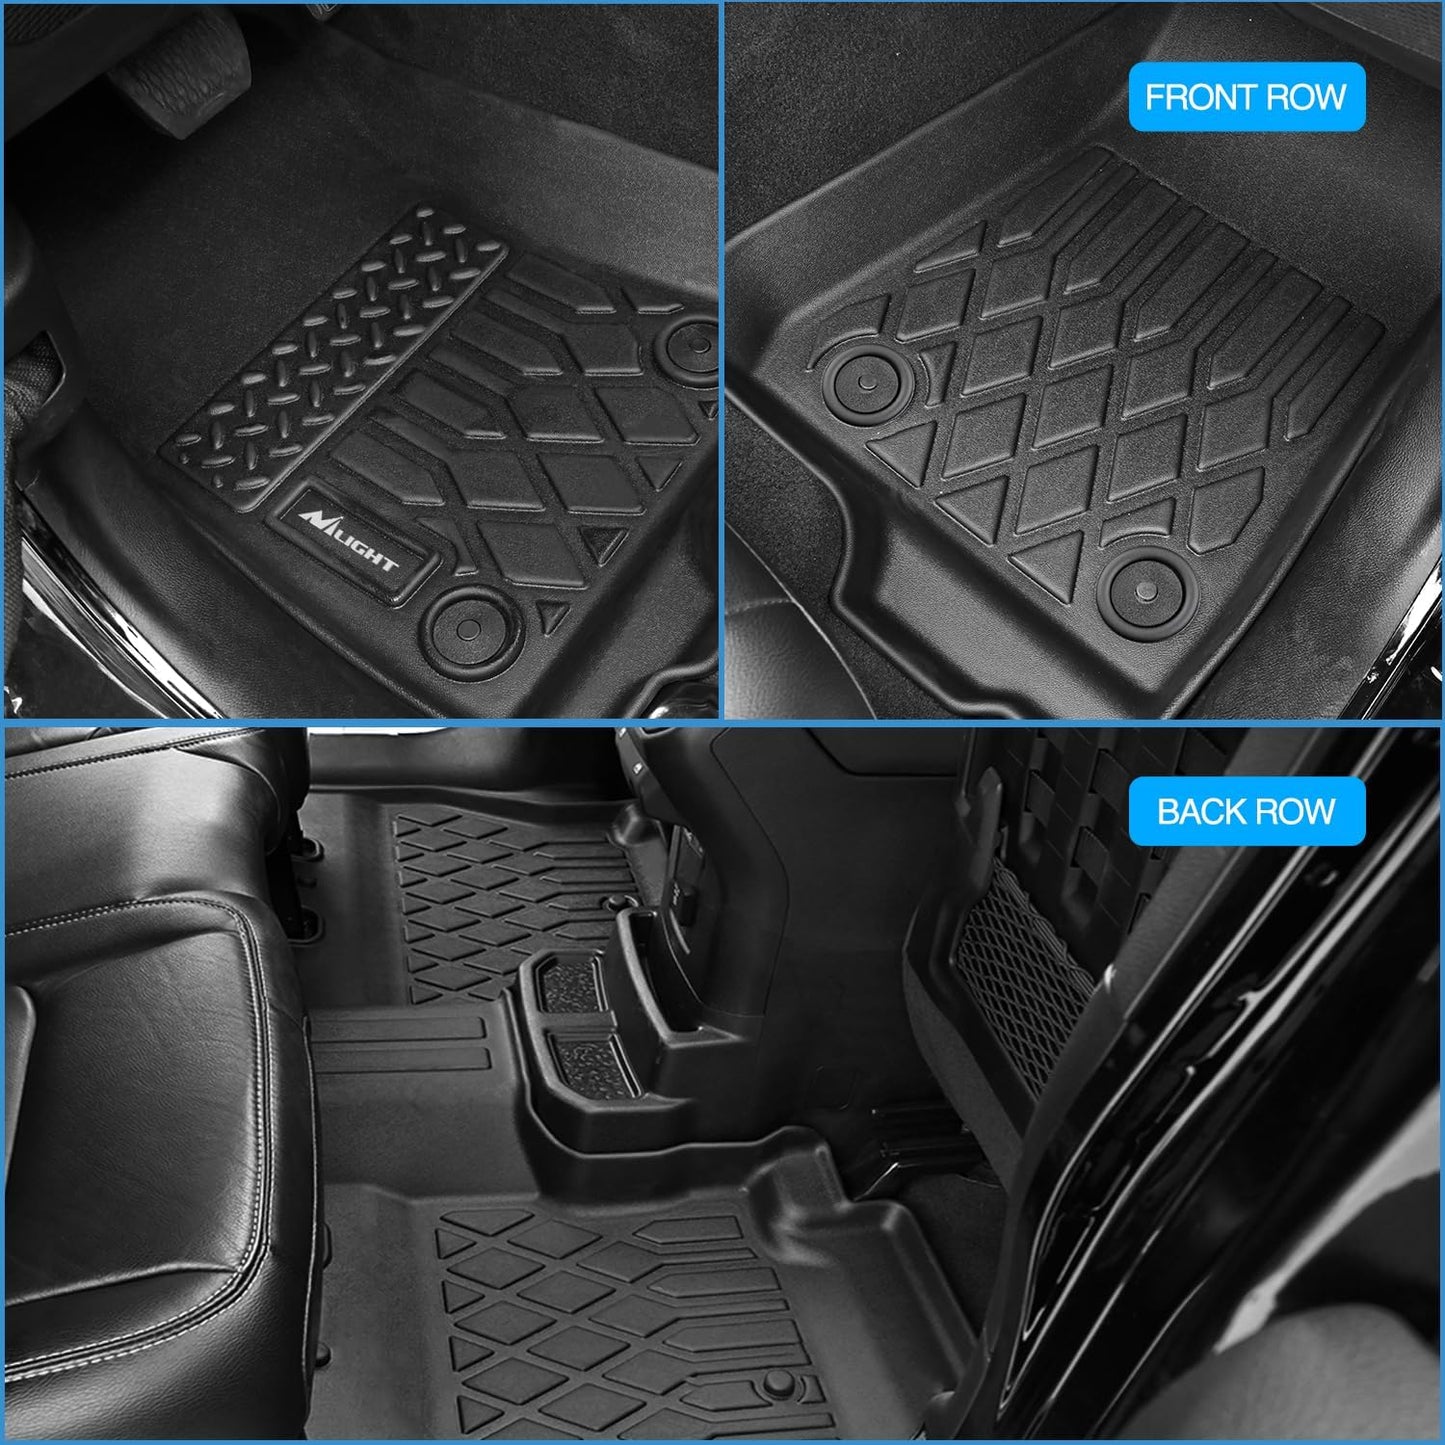 Nilight TPE Floor Mats for Jeep Compass 2017 2018 2019 2020 2021 2022 2023 2024,All Weather Custom Fit Heavy Duty Floor Liners